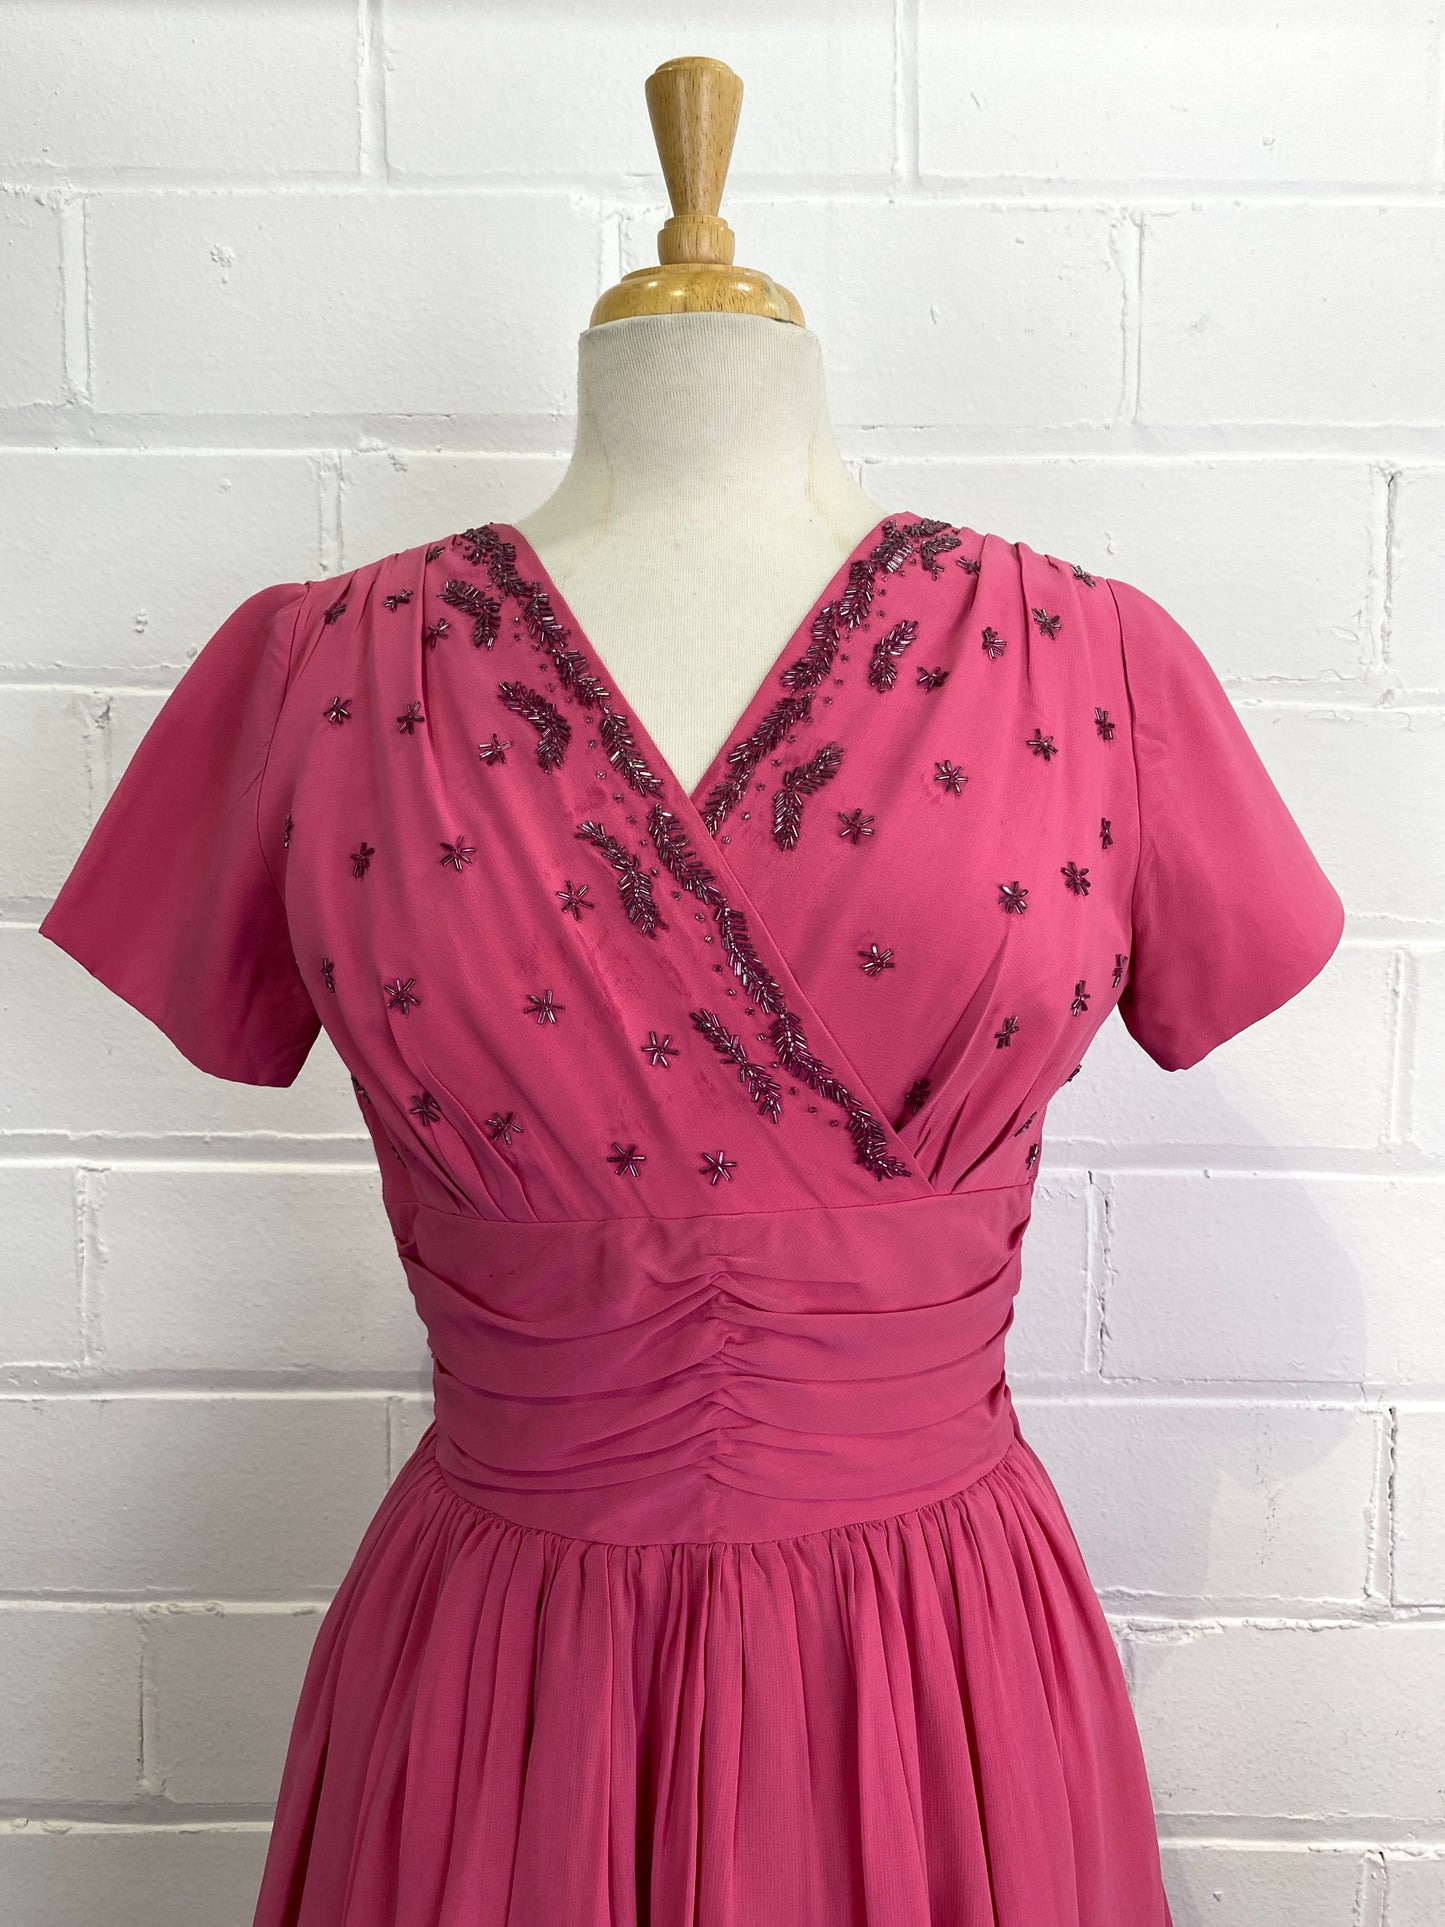 Vintage 1960s Short-Sleeve Beaded Pink Tiered Skirt  Dress, Small